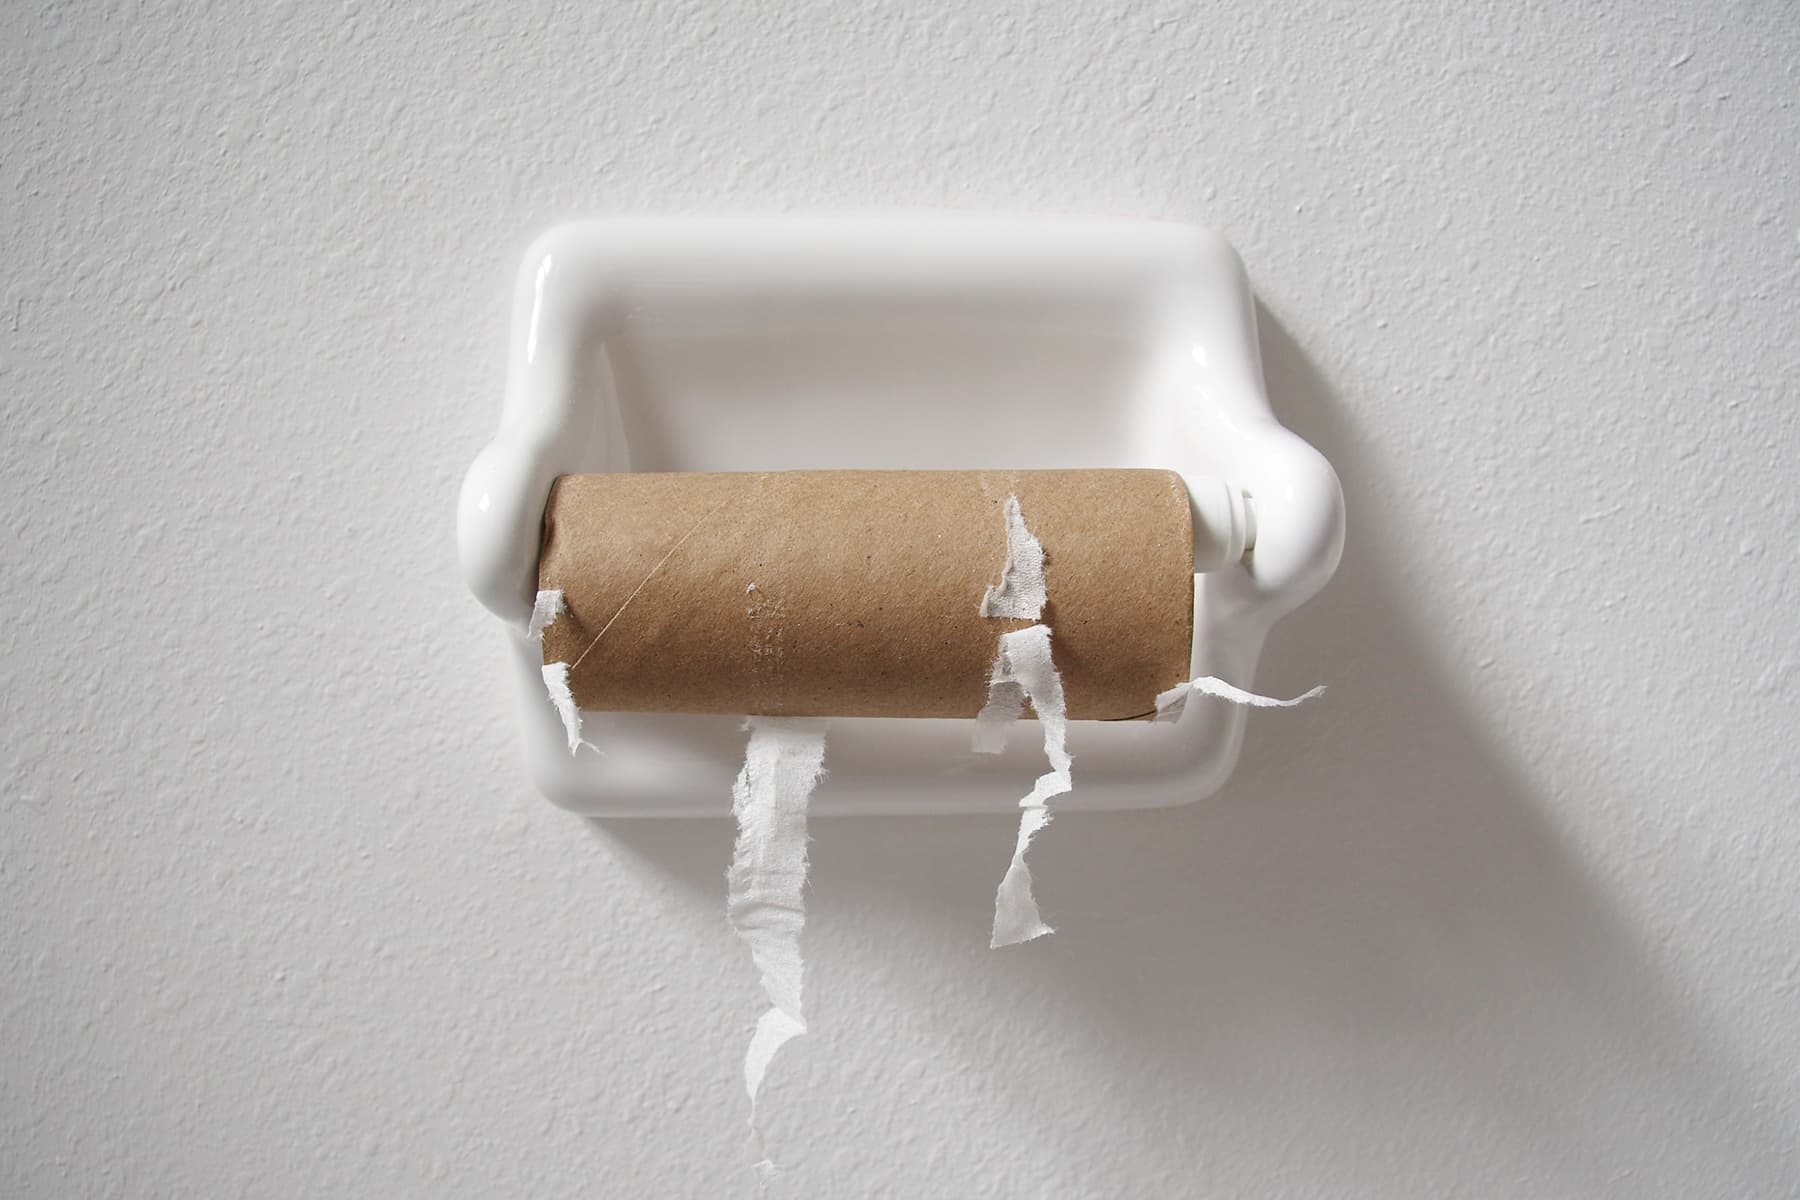 Terror-Hunting for Lavatory Paper Is a Infamous Addiction We Can Smash